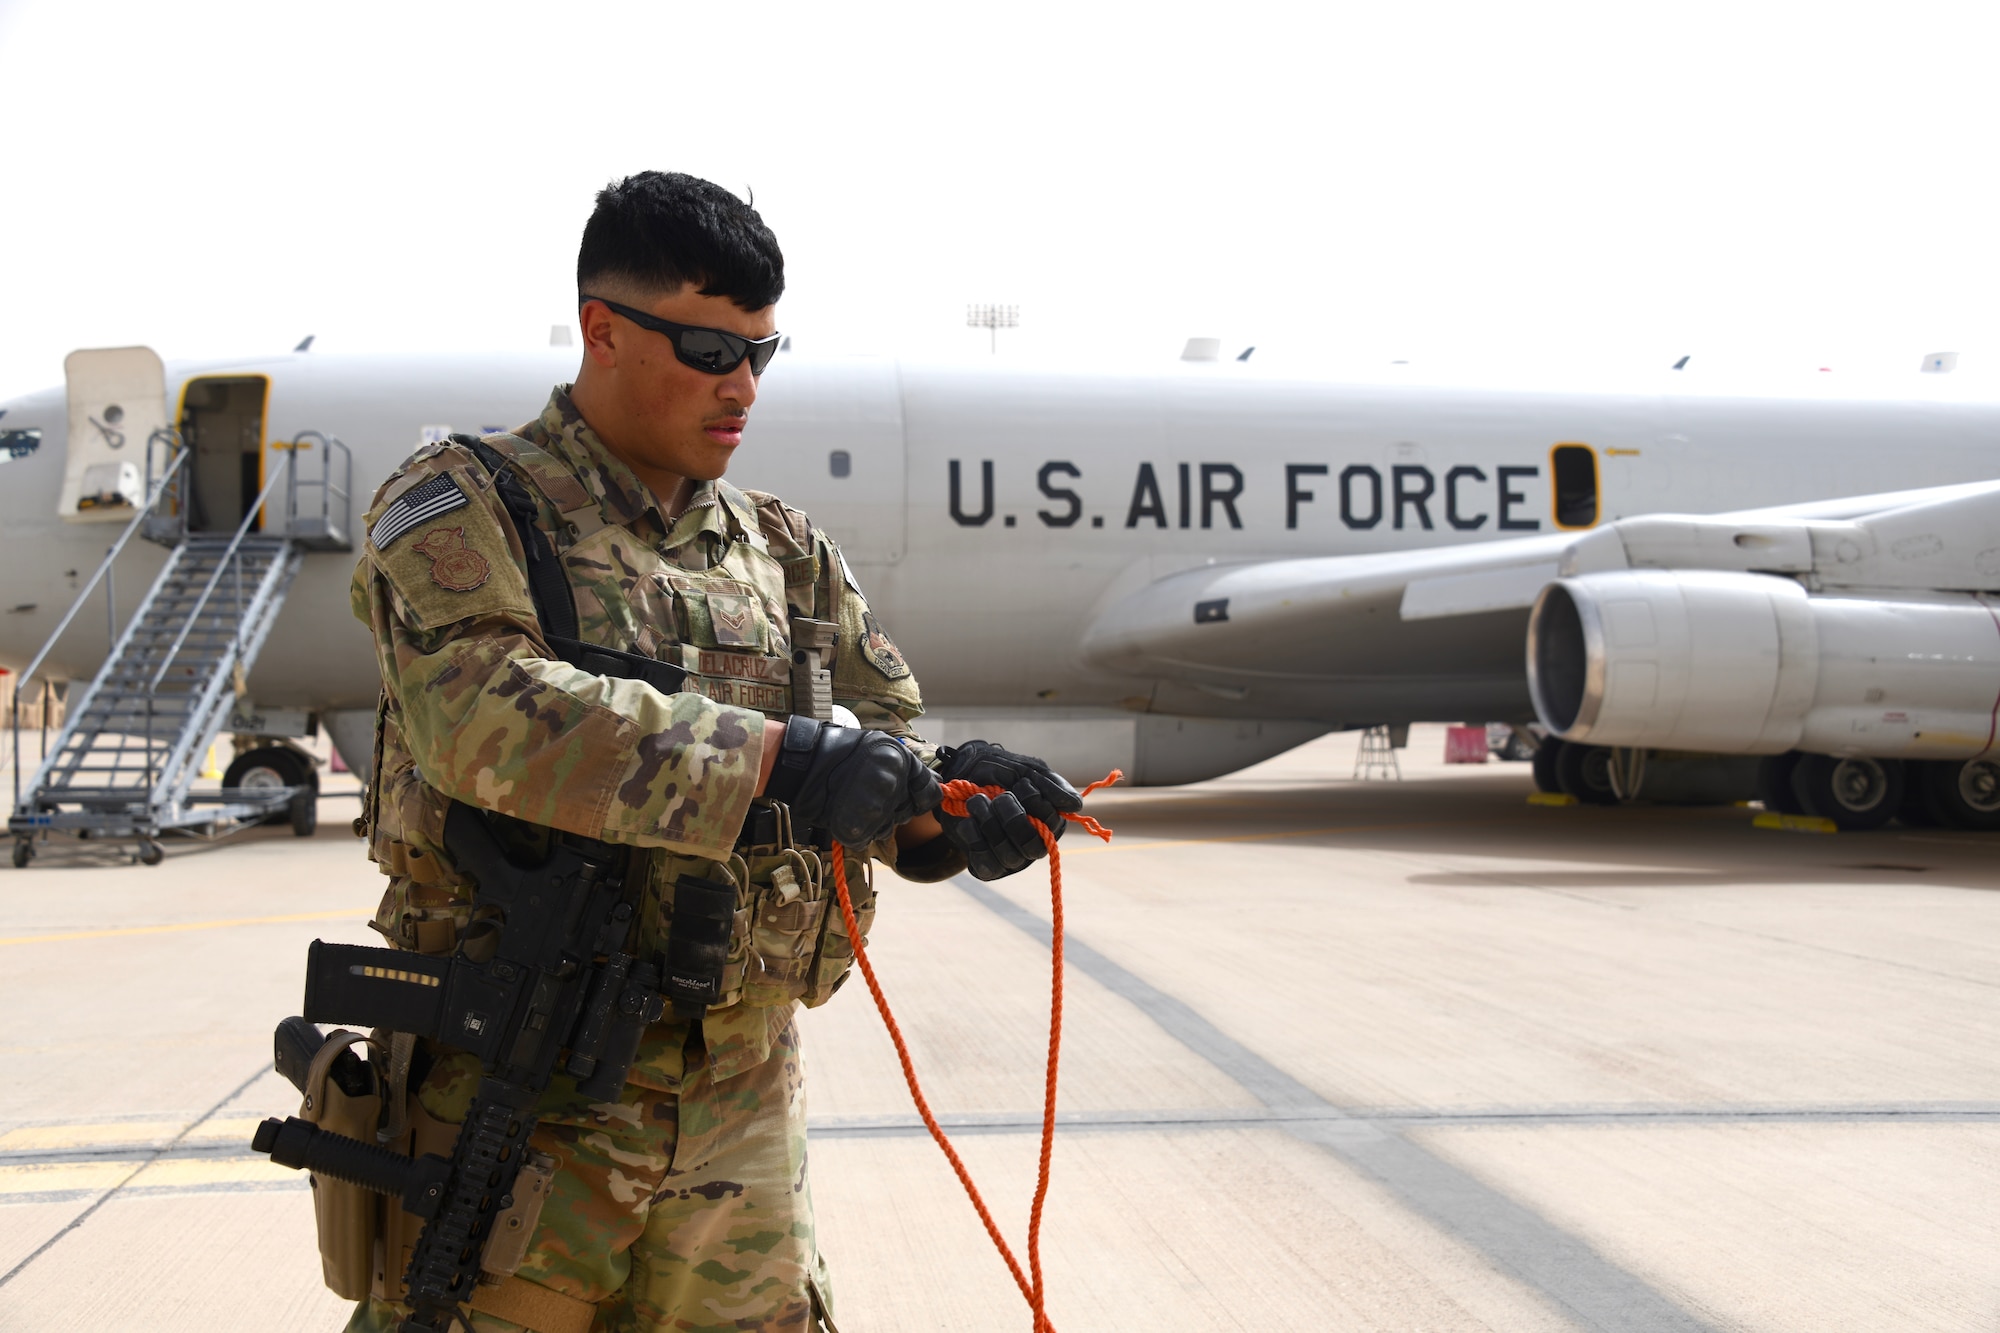 U.S. Air Force Airman 1st Class Christian Delacruz, 378th Expeditionary Security Forces Squadron defender, establishes a security perimeter around an E-8C Joint Surveillance Target Attack Radar System (JSTARS) at Prince Sultan Air Base, Kingdom of Saudi Arabia, March 8, 2020.